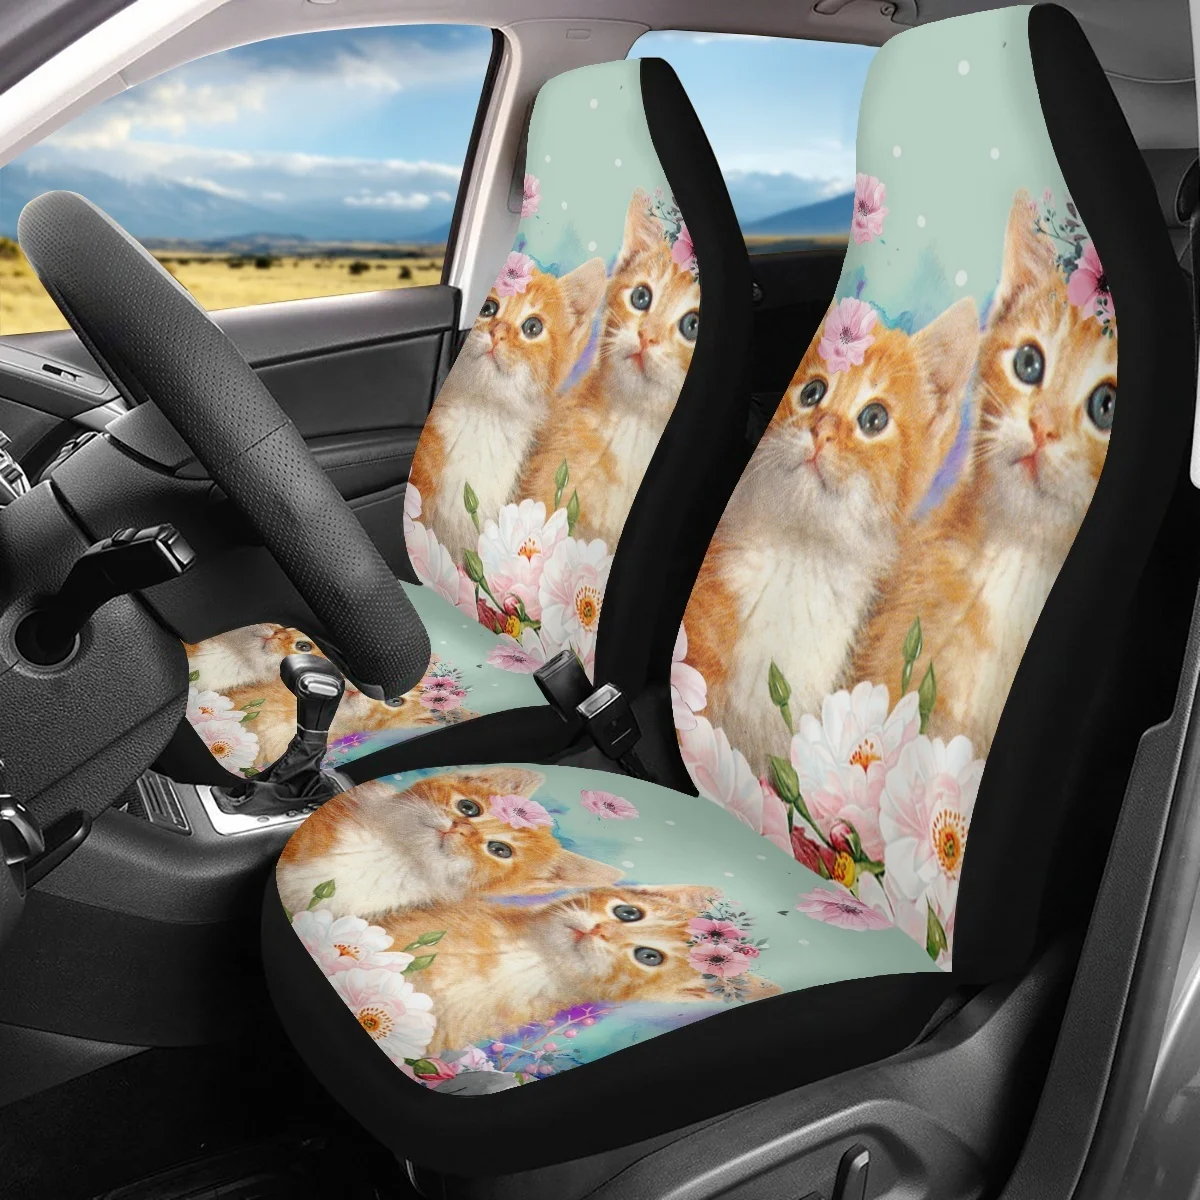 Cute Tabby Cat 3D Design Car Seat Covers Fit Most Vehicle Set of 2 Non-skid Elastic Universal Car Front Seat Covers Accessories